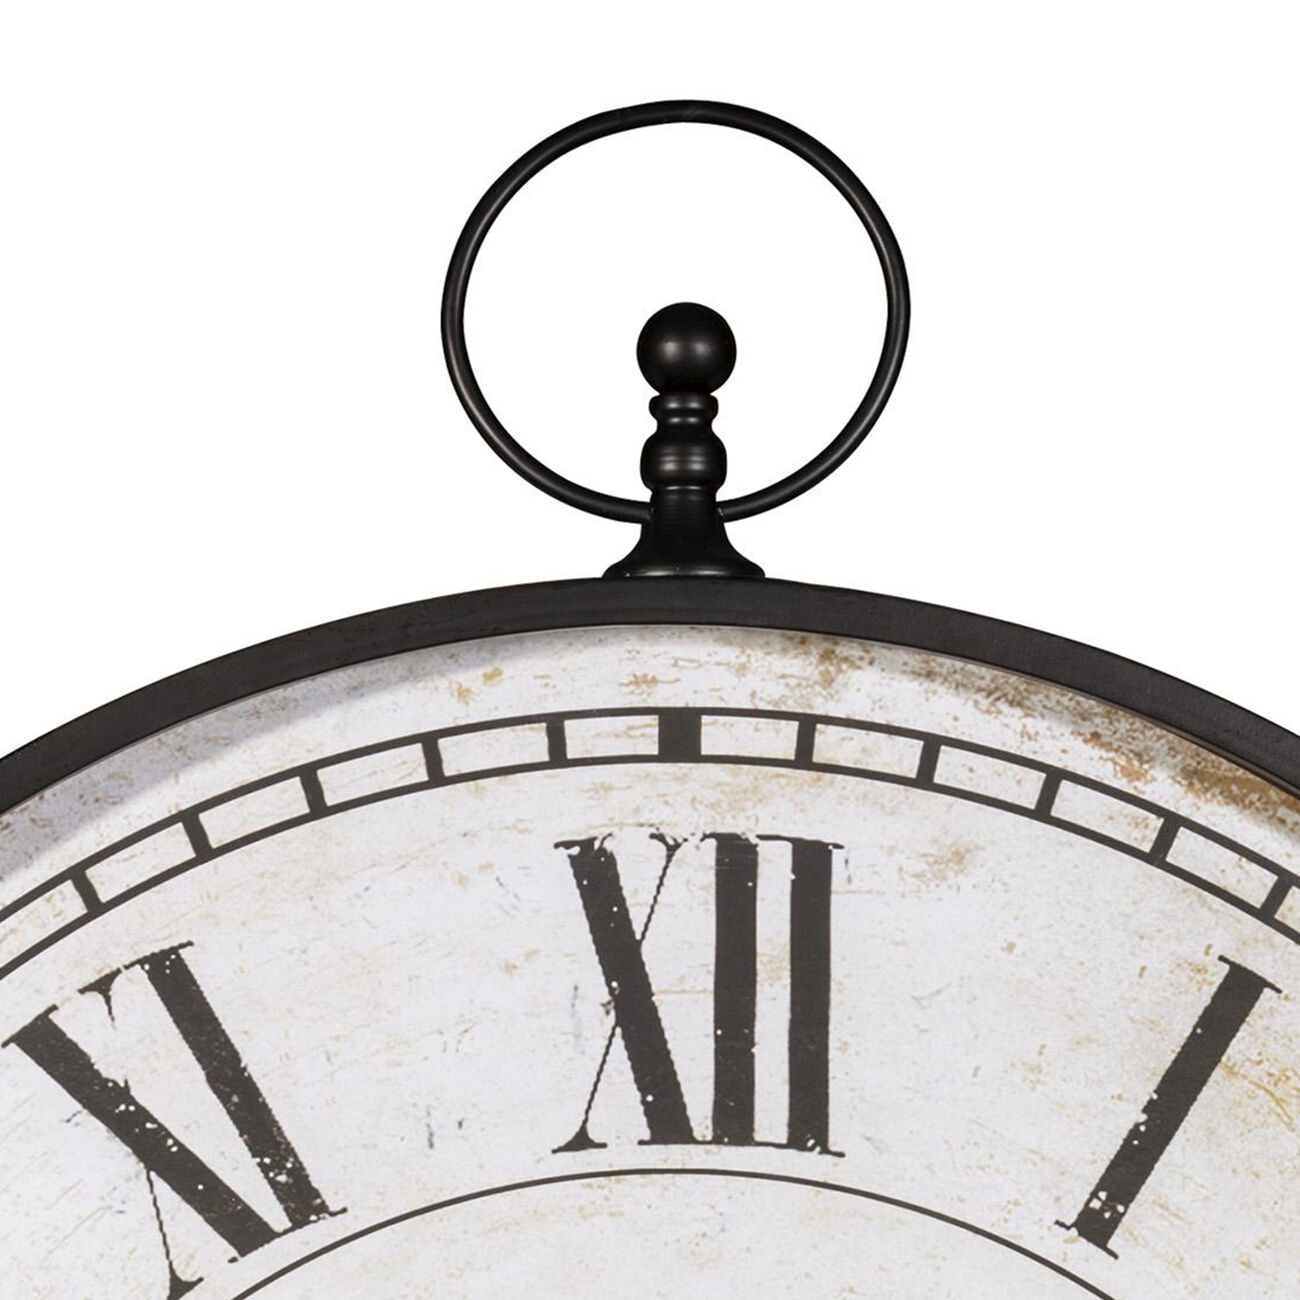 Round Metal Wall Clock with Roman Numerals, Black and White